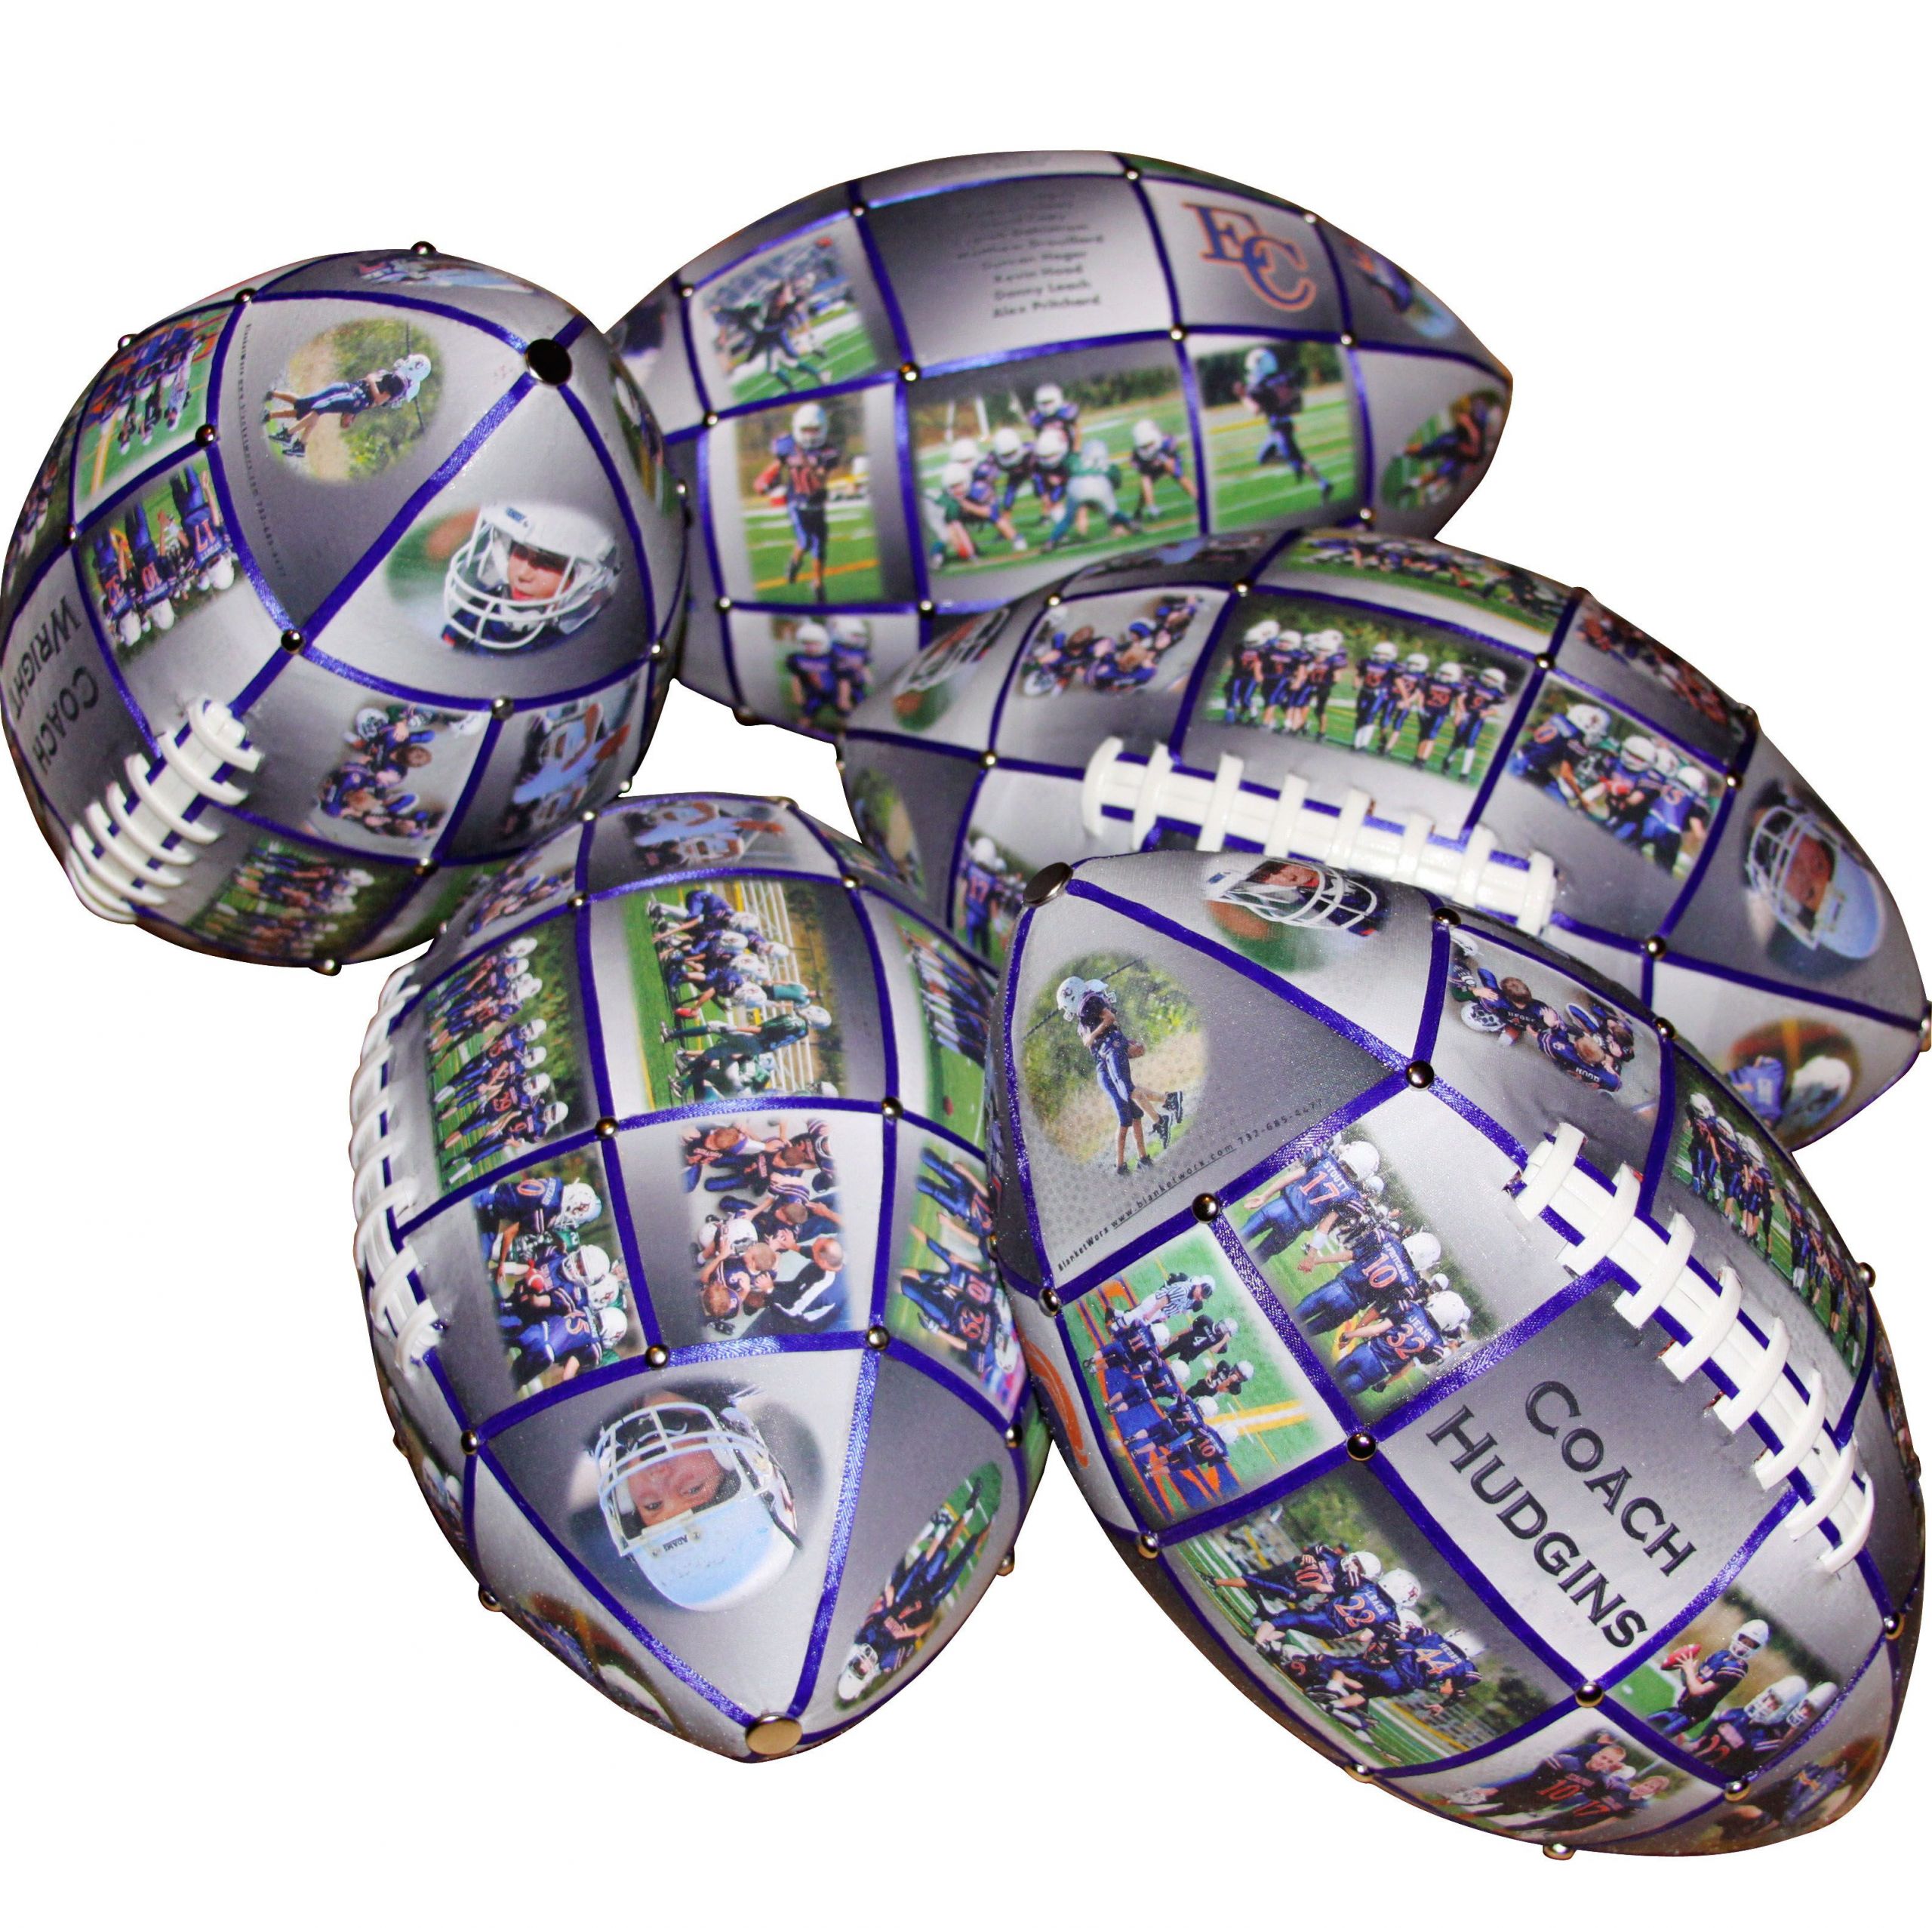 Football Gift Baskets Ideas
 football photo ball Give a Unique Football Gift that will